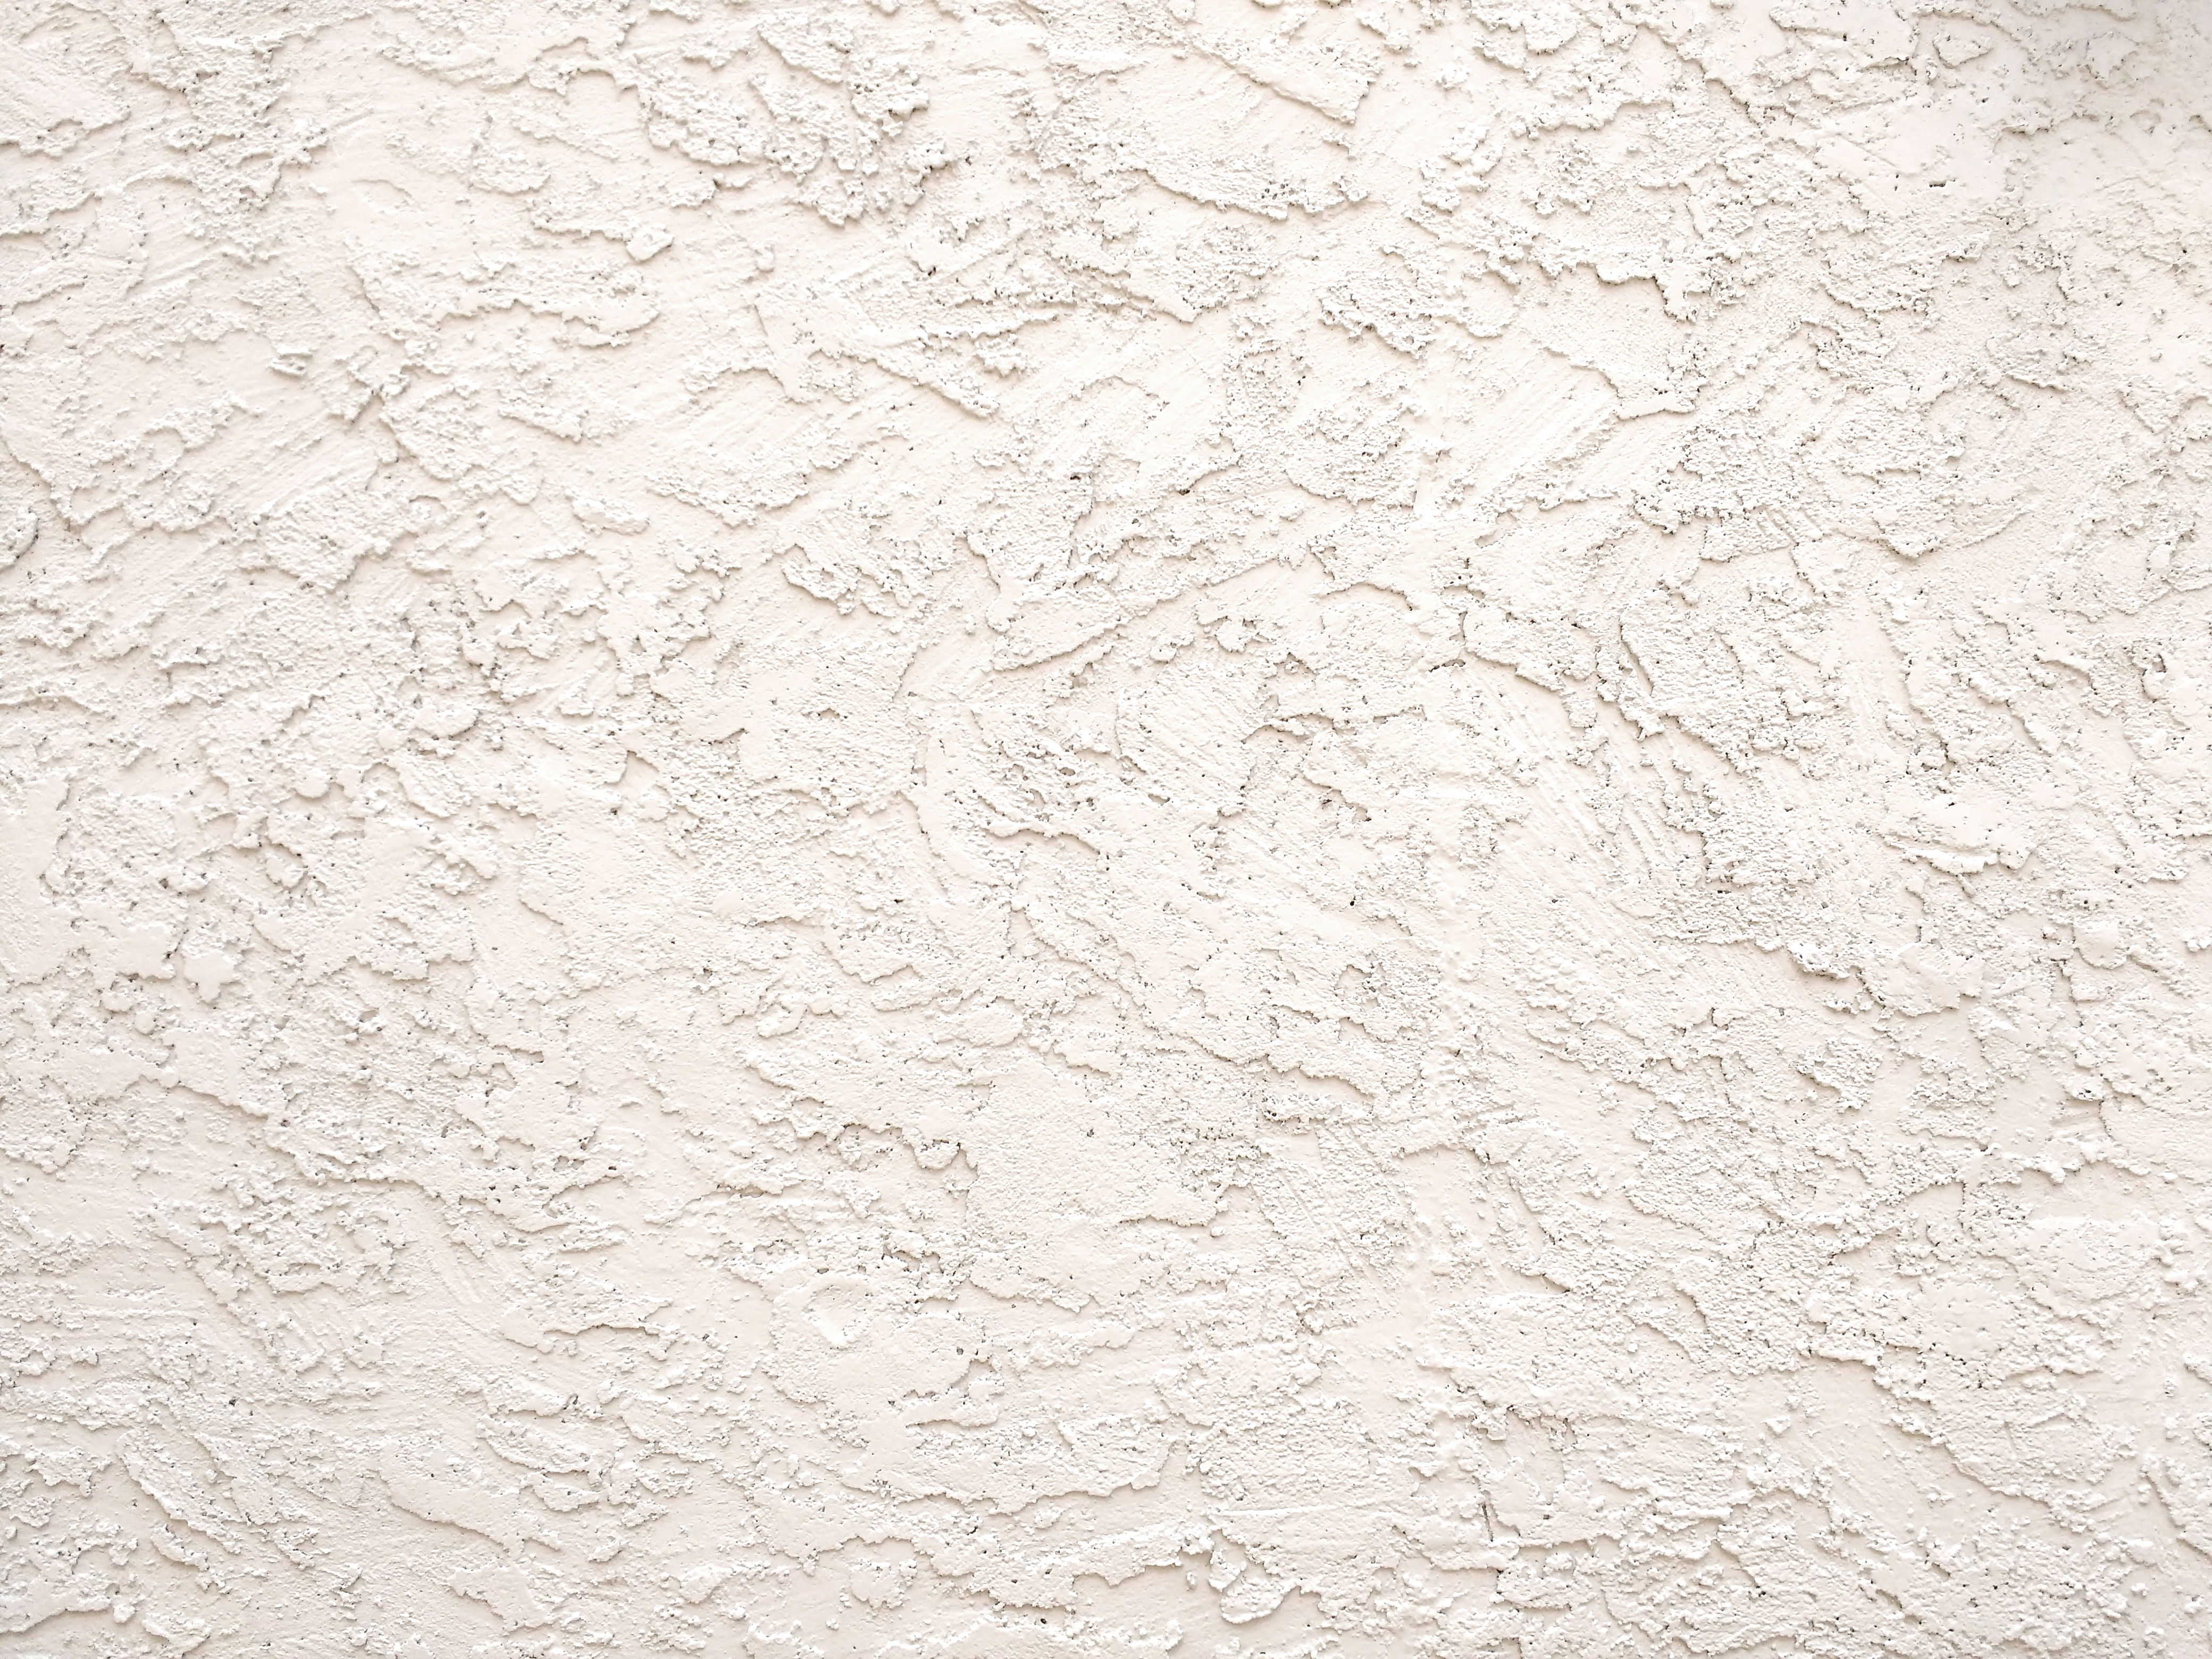 Wall Stucco Texture 1 Wall Stucco Texture Stucco Texture | Images and ...